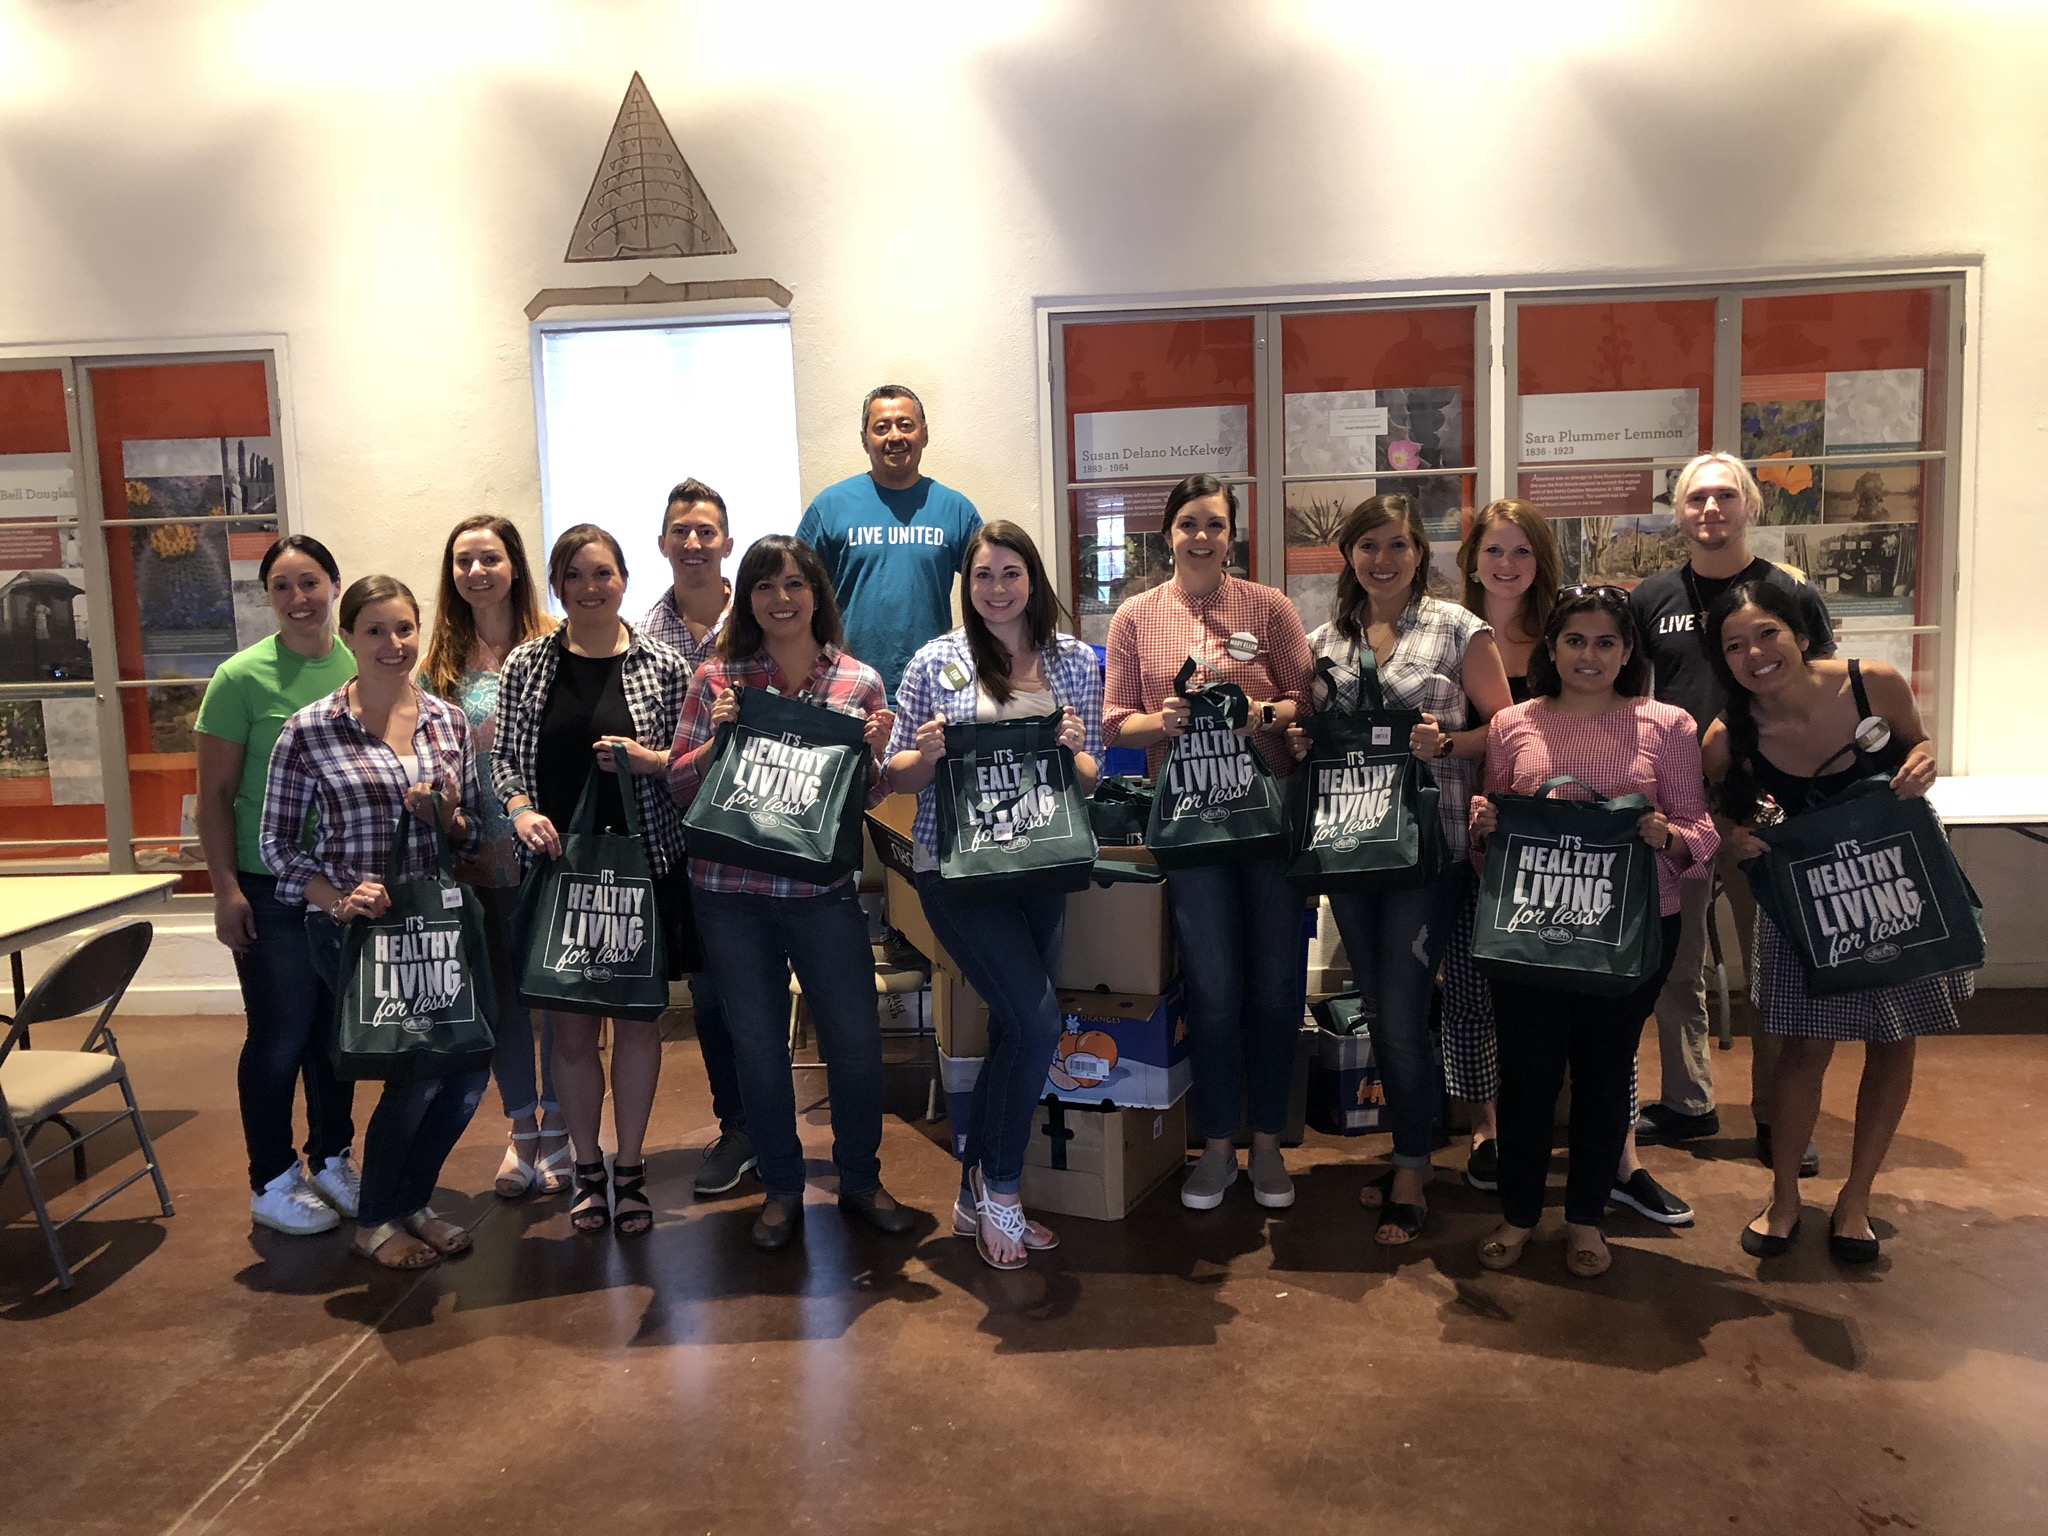  While we were in Scottsdale, we got to help package 175 emergency meal kits that were delivered to families of children in summer school in local Arizona schools. 